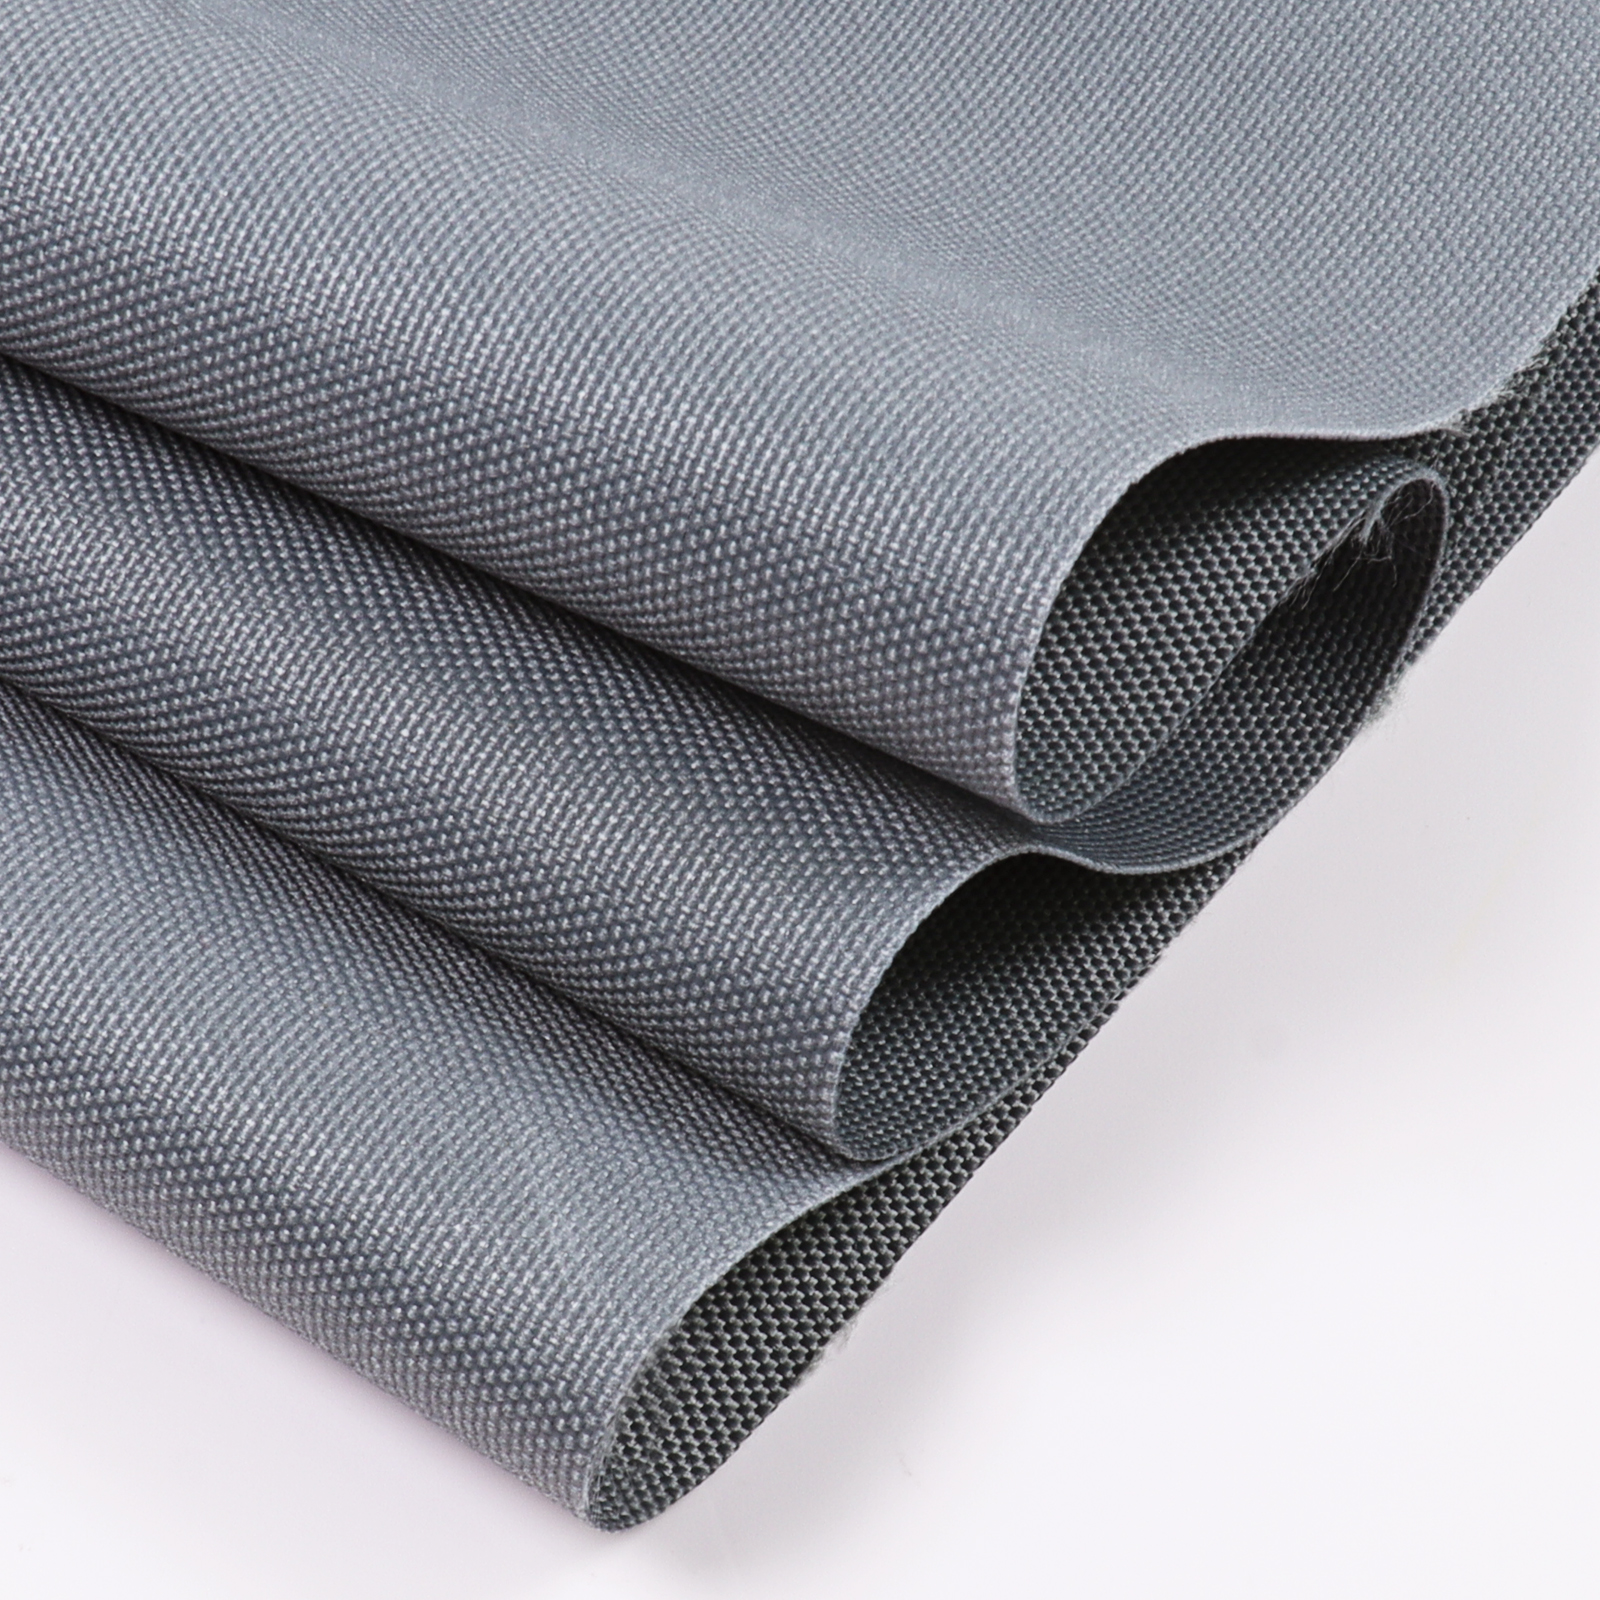 Soft Waterproof Canvas Fabric 600D PU Backing Canvas Cordura Fabric for  Outdoor/Indoor, DIY Craft, Awning, Marine, Tent, Bags, Upholstery Grey 48  x 60 